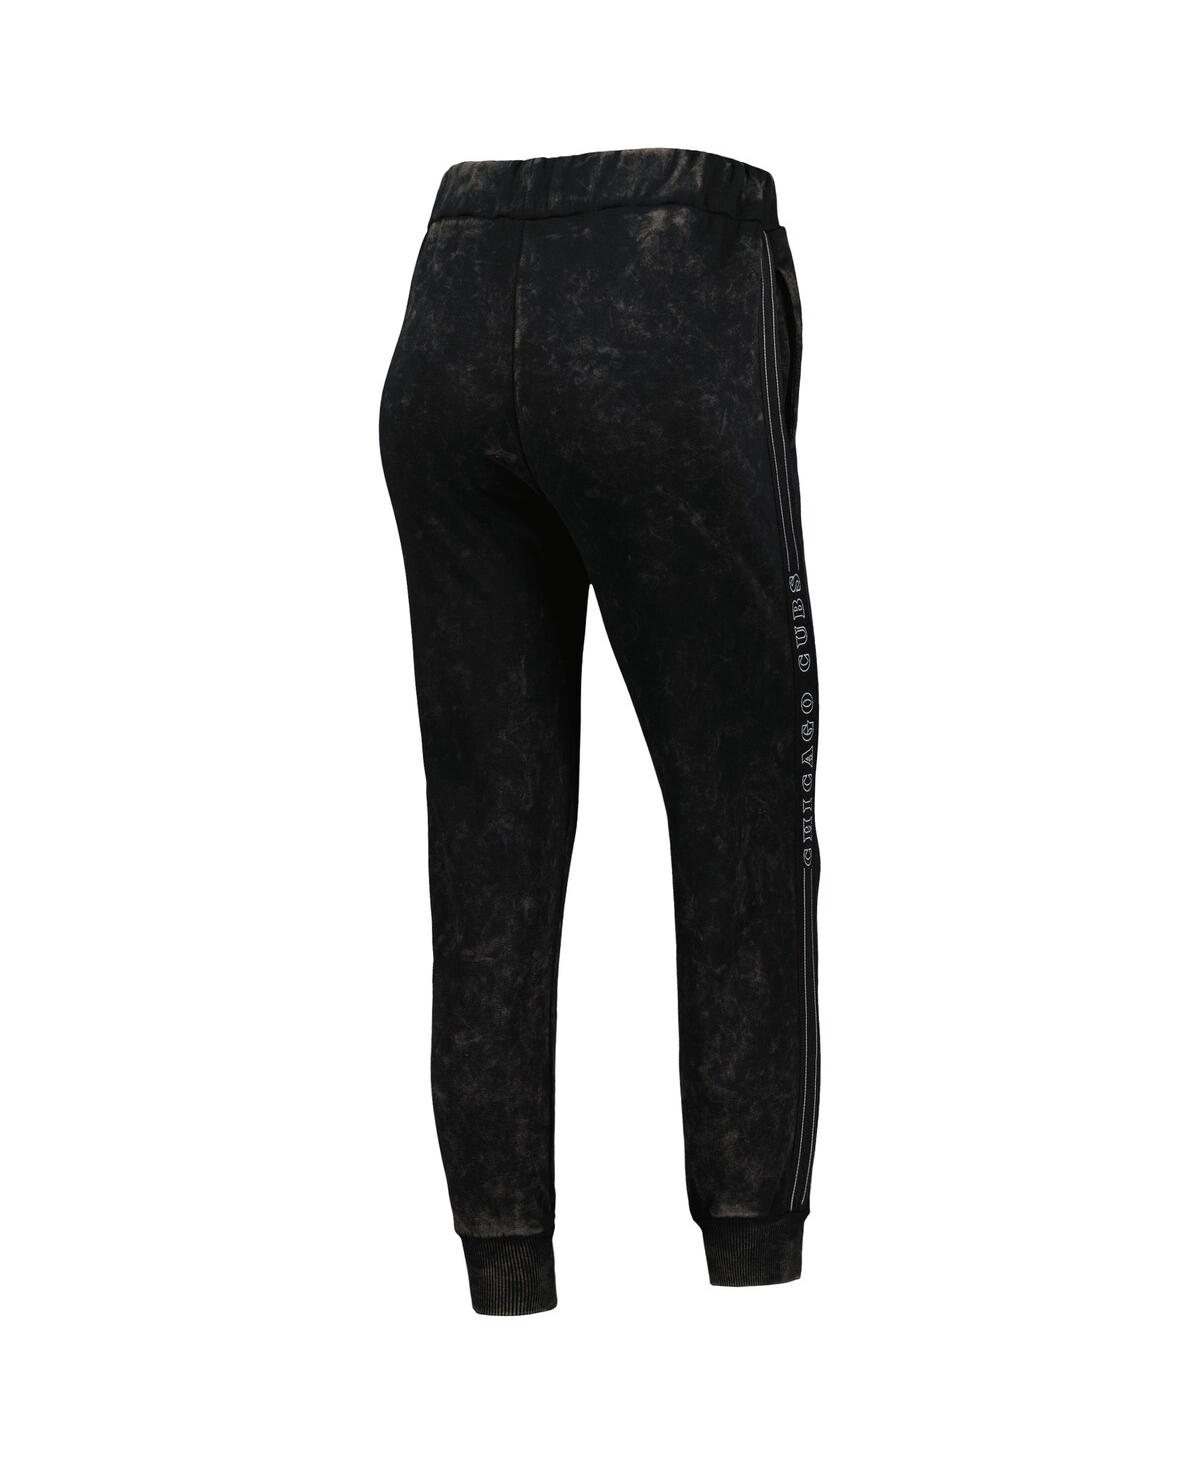 Shop The Wild Collective Women's  Black Chicago Cubs Marble Jogger Pants